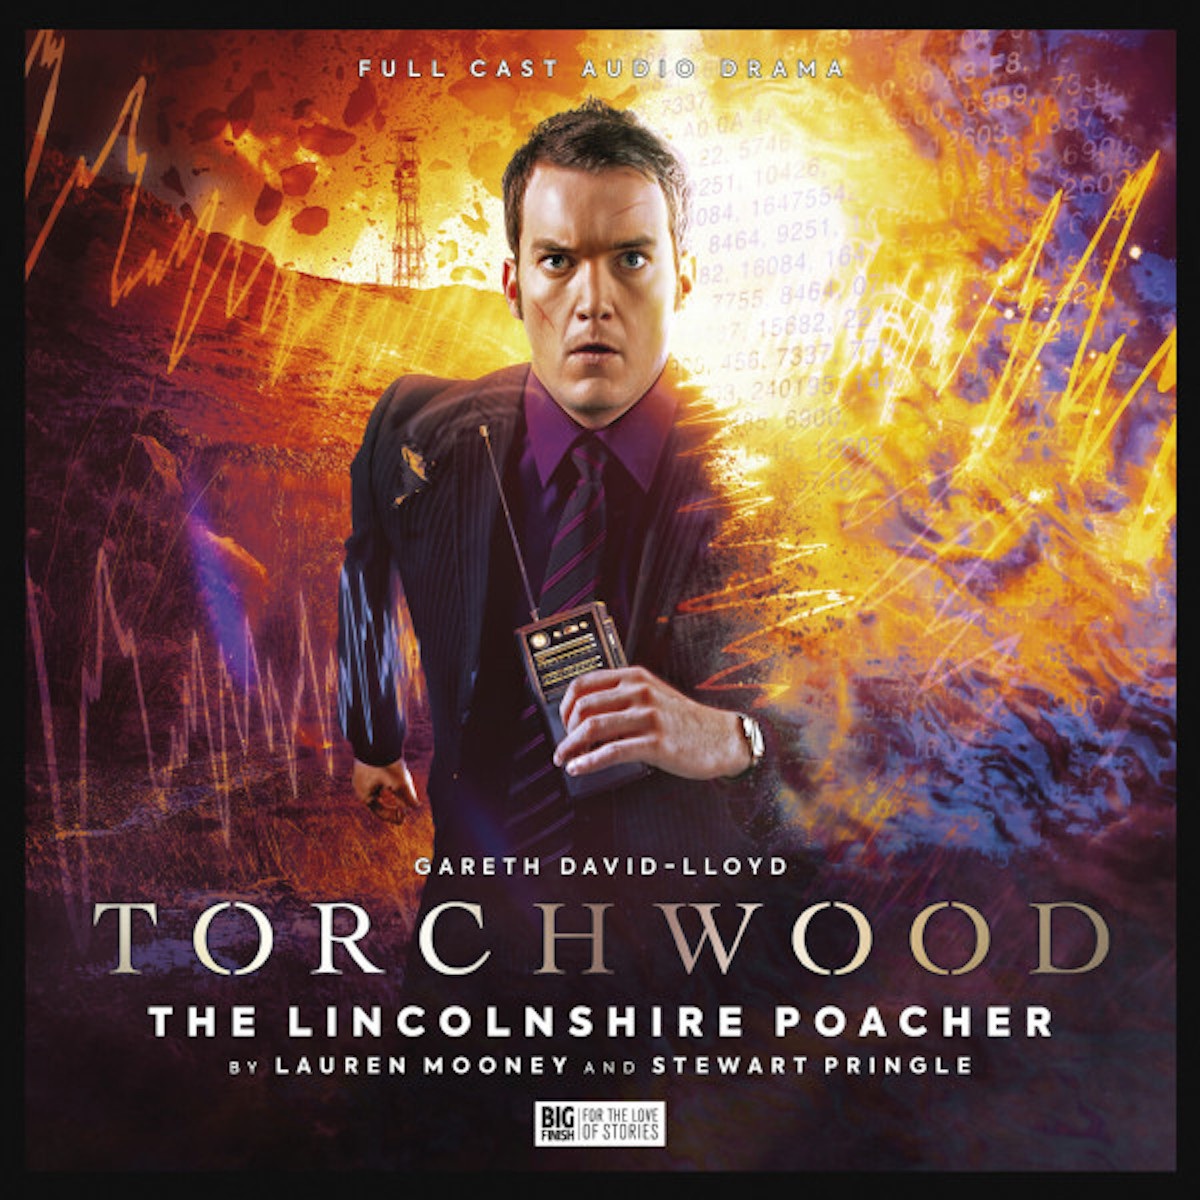 Torchwood: The Lincolnshire Poacher